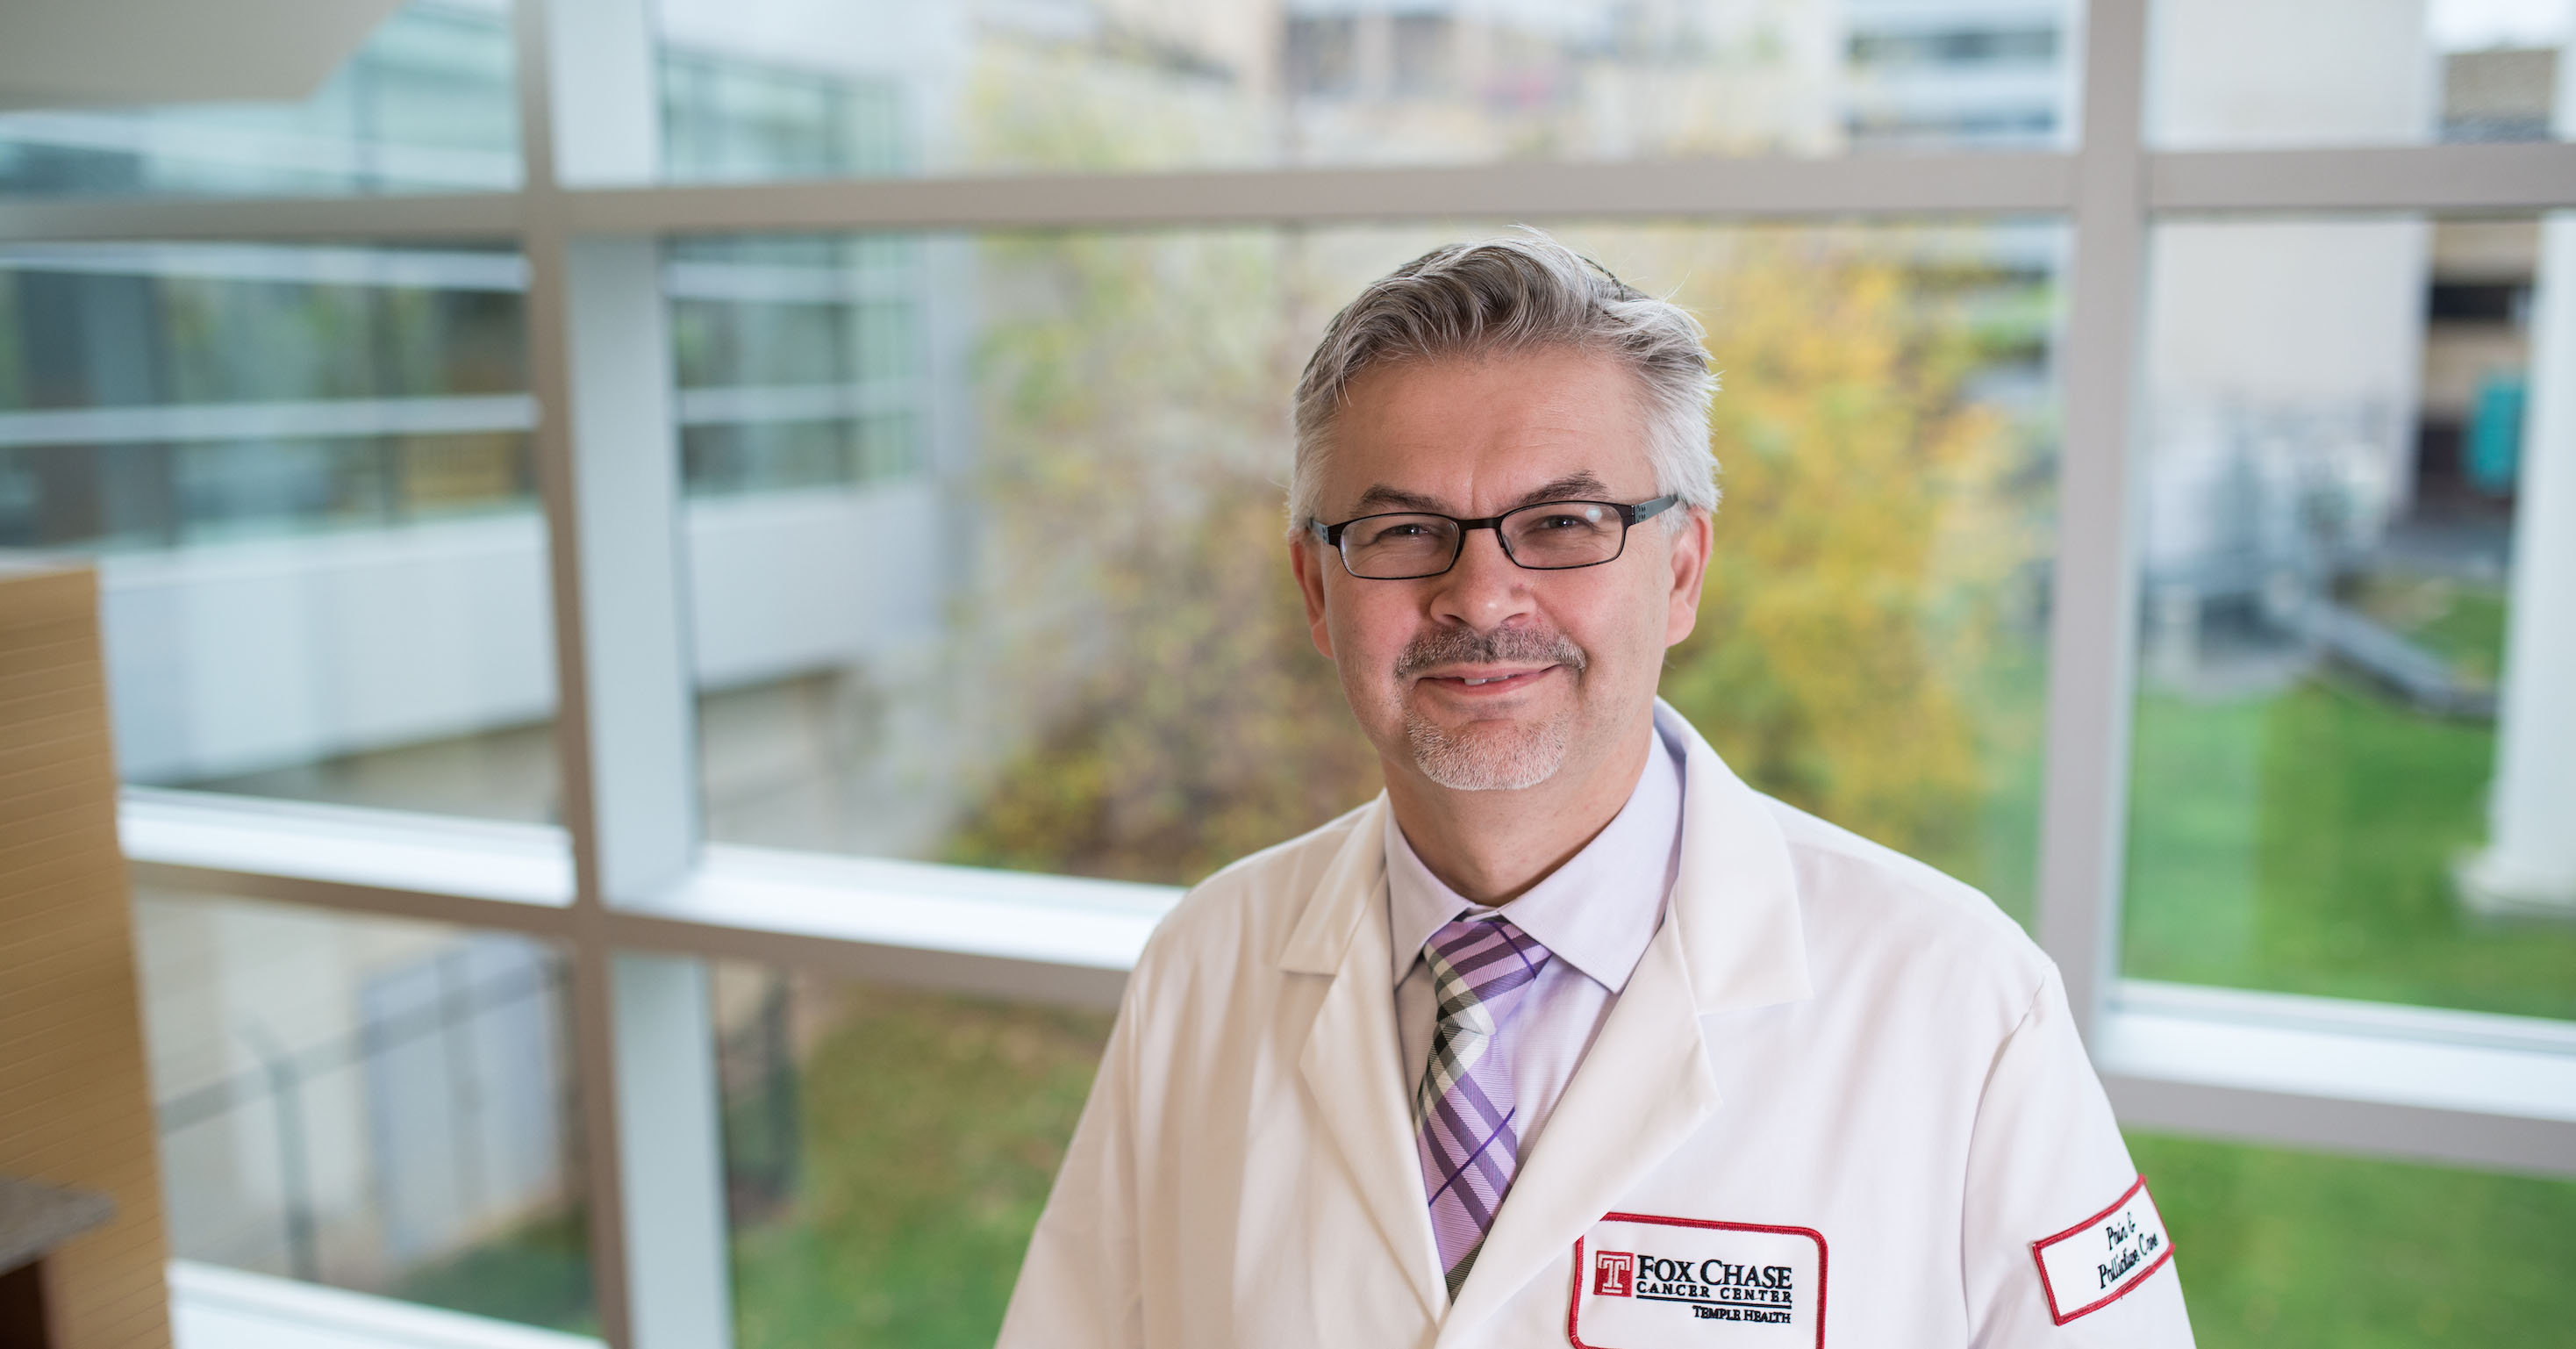 Marcin Chwistek, MD, FAAHPM, a professor in the Department of Hematology/Oncology and director of the SOPCP